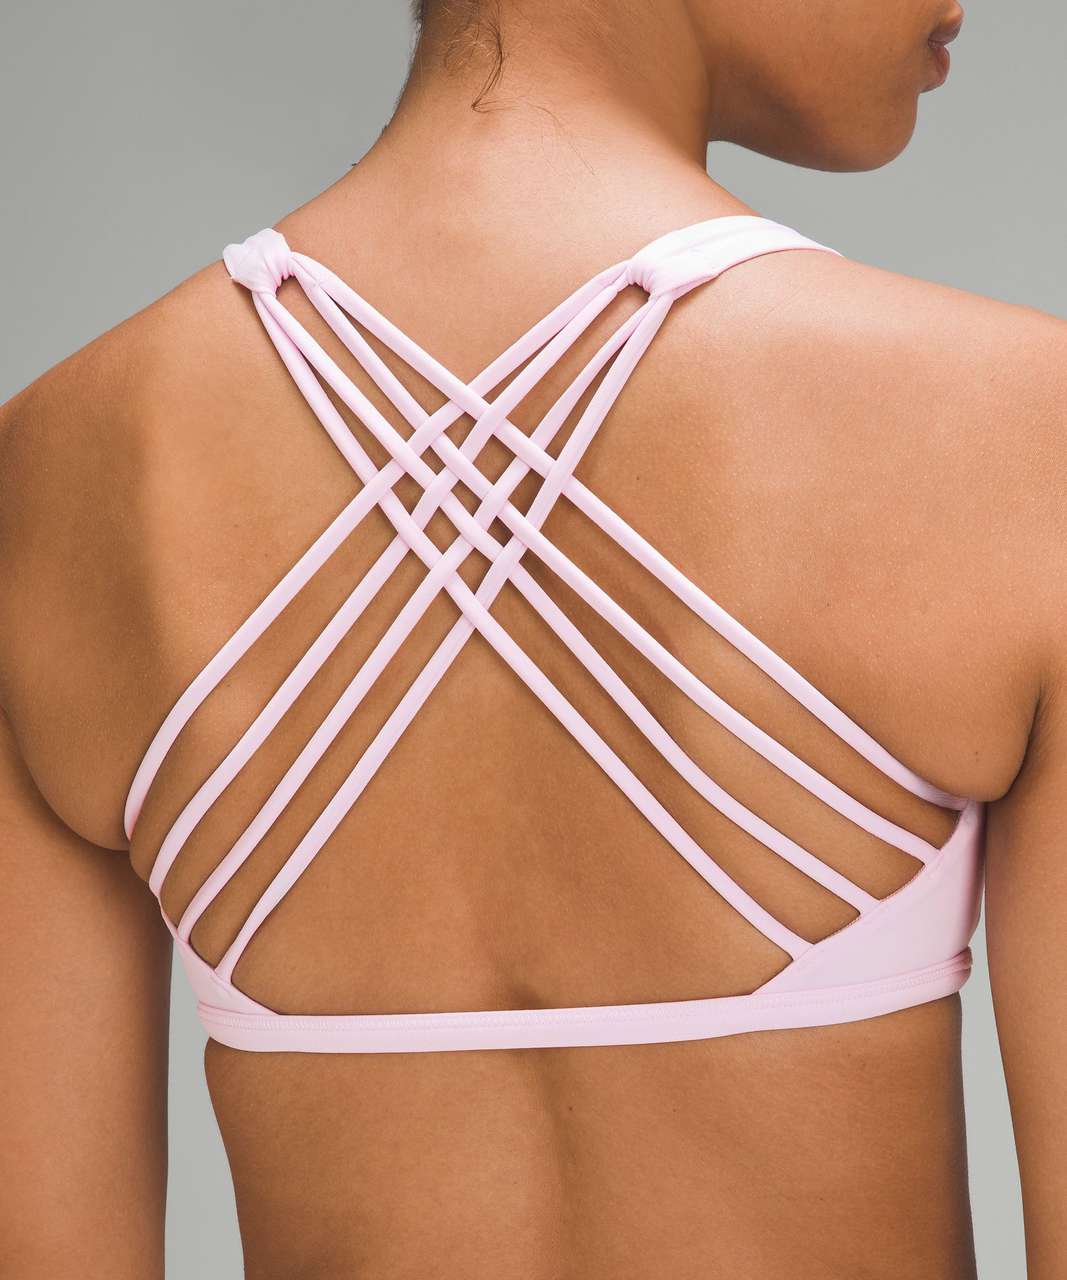 Lululemon Free to Be Bra - Wild *Light Support, A/B Cup - Meadowsweet Pink